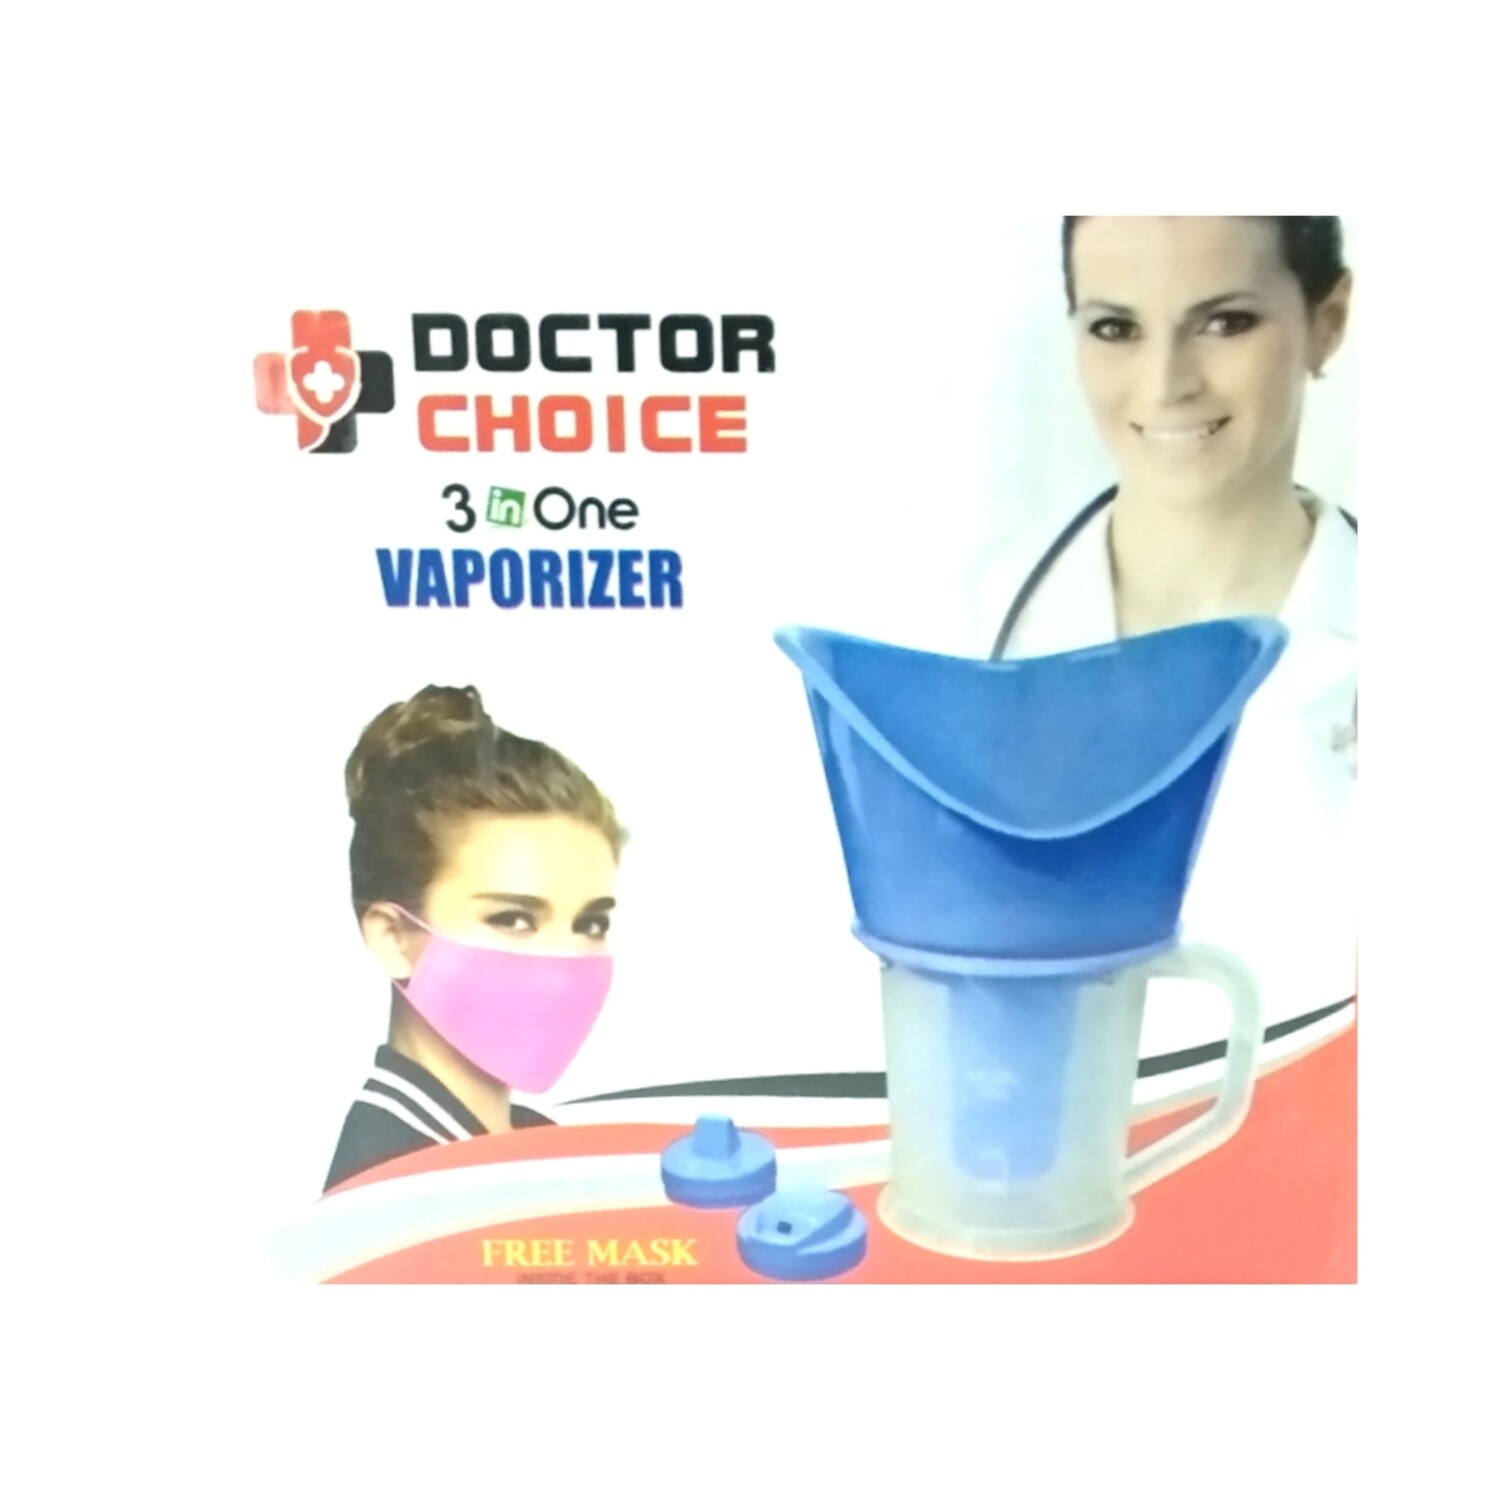 Doctor Choice All in One Vaporizer, Facial Sauna and Nose Steamer 3 In 1 Steam Inhaler